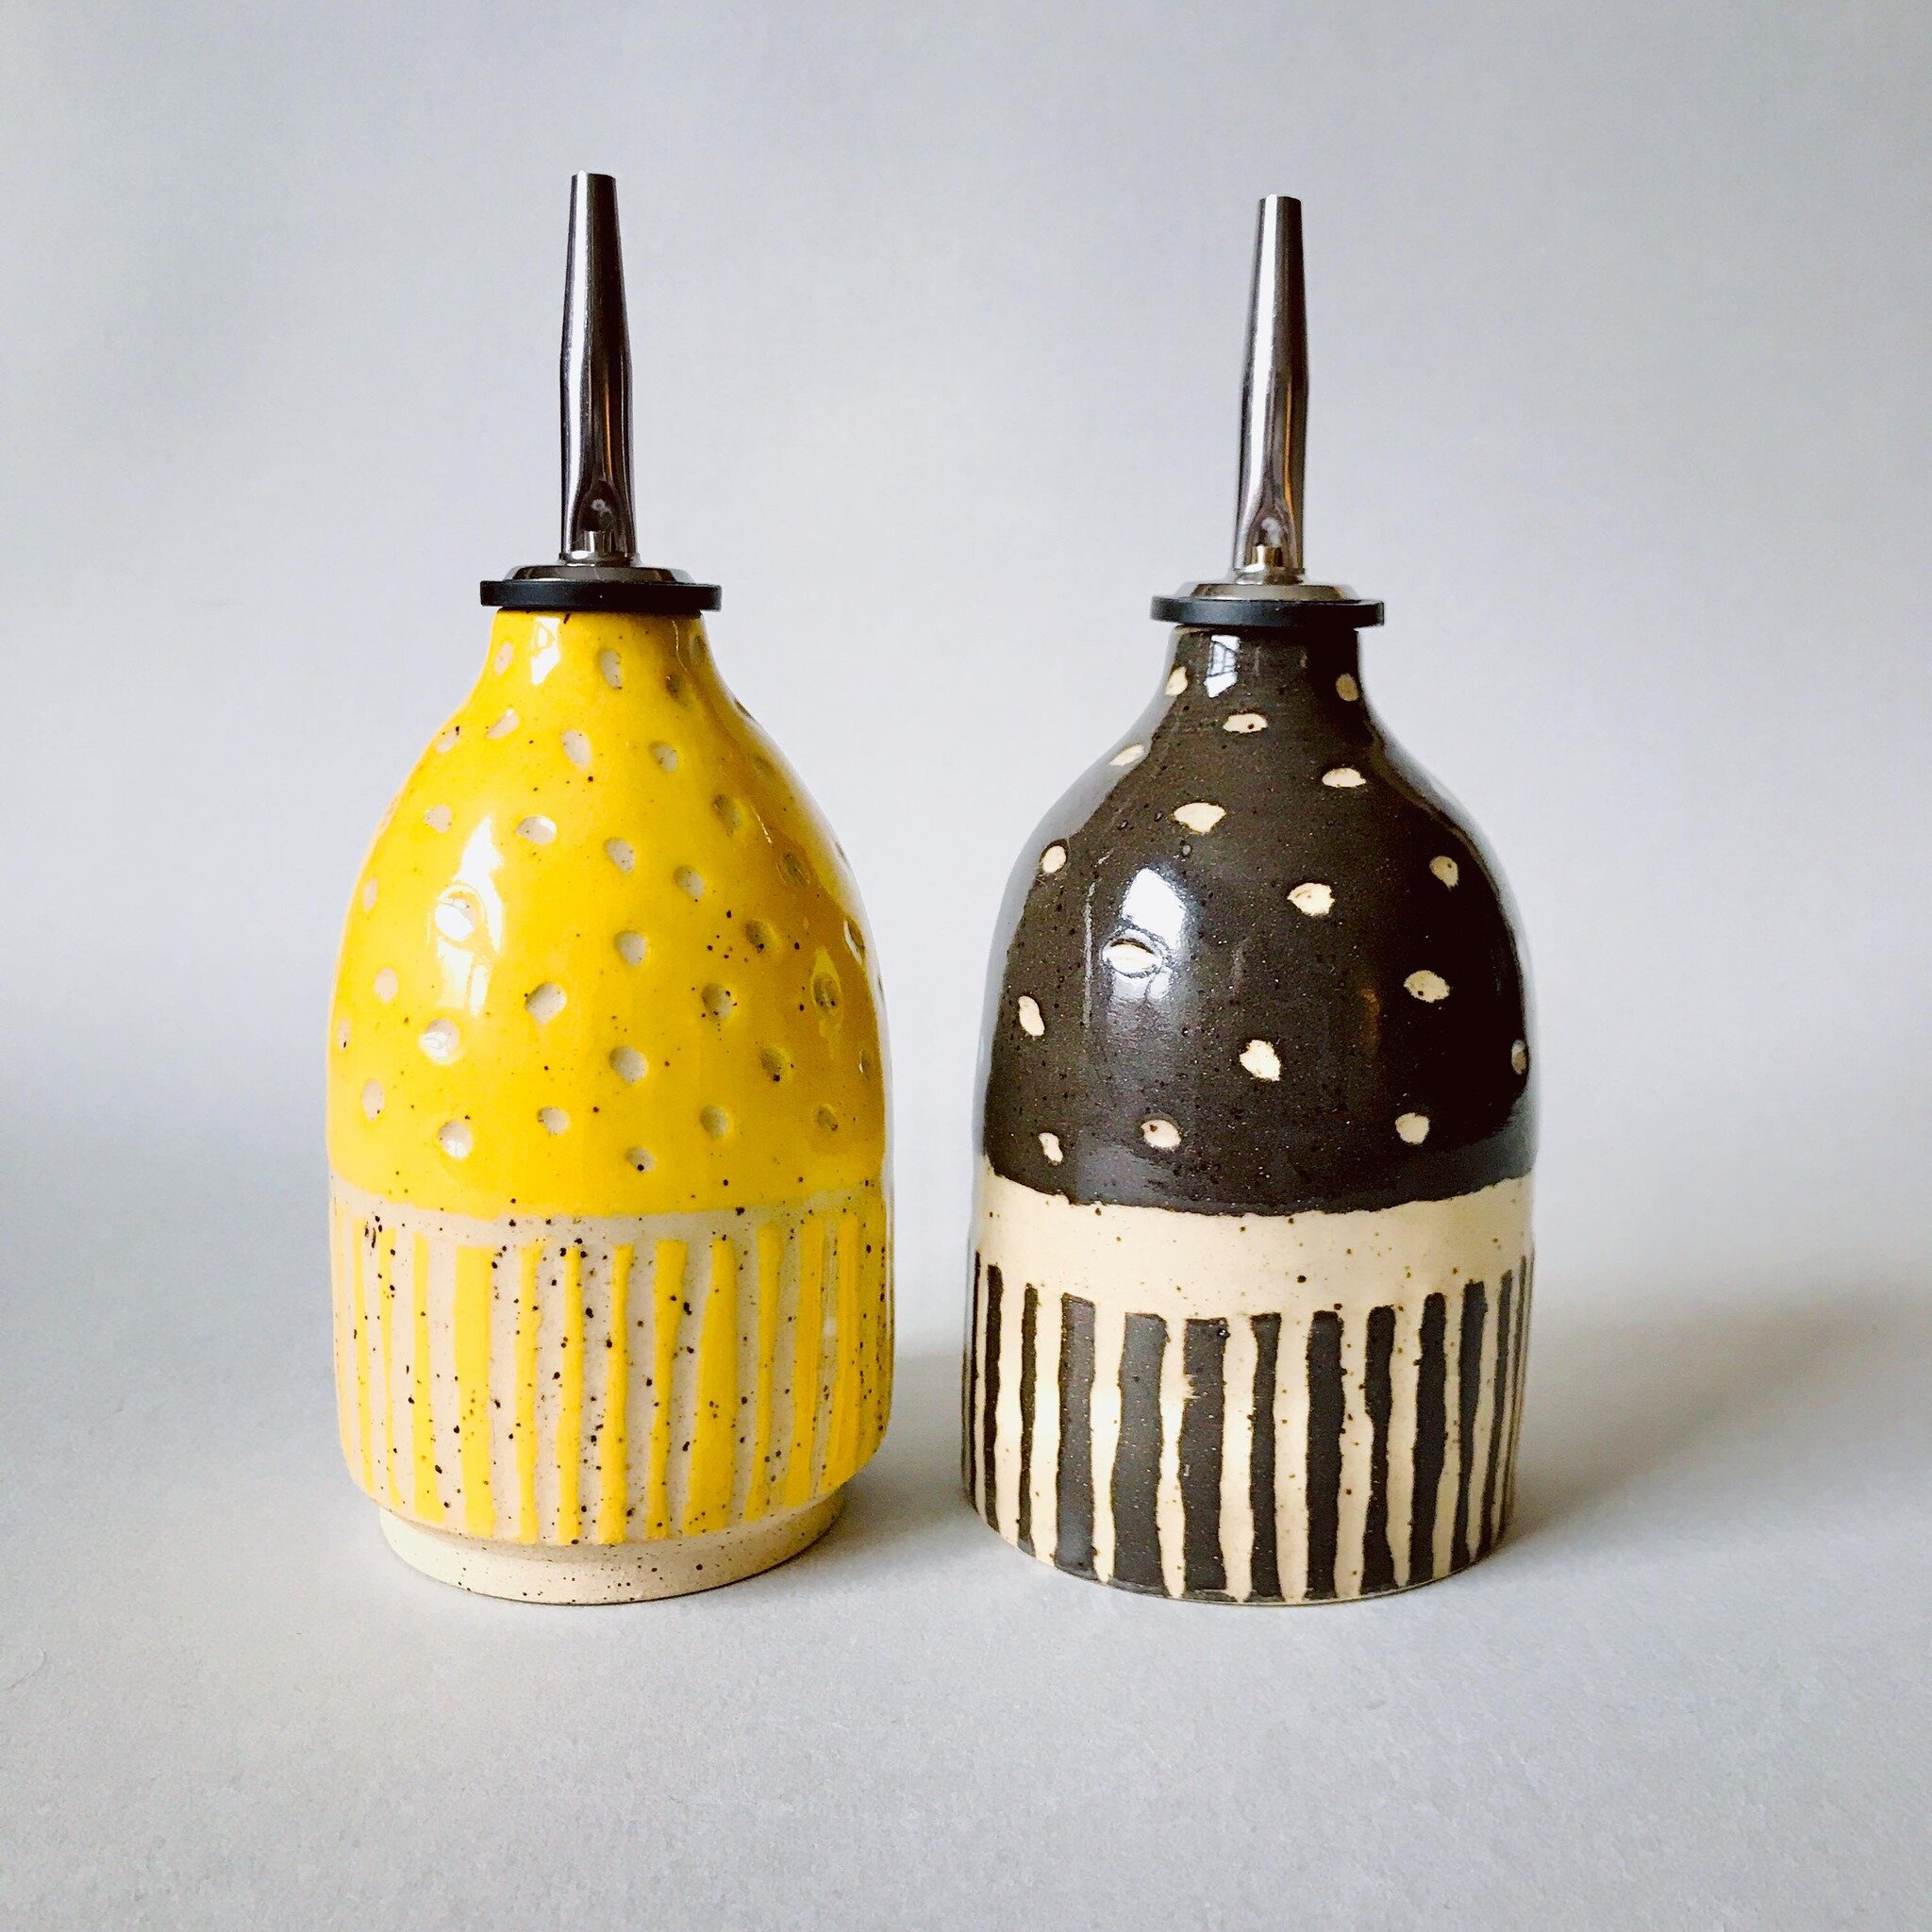 🐝 A couple new carved bottles. Loving how this yellow turned out - you?
&hellip;
#yellow #oliveoil #oliveoilbottle #handmade #ceramics